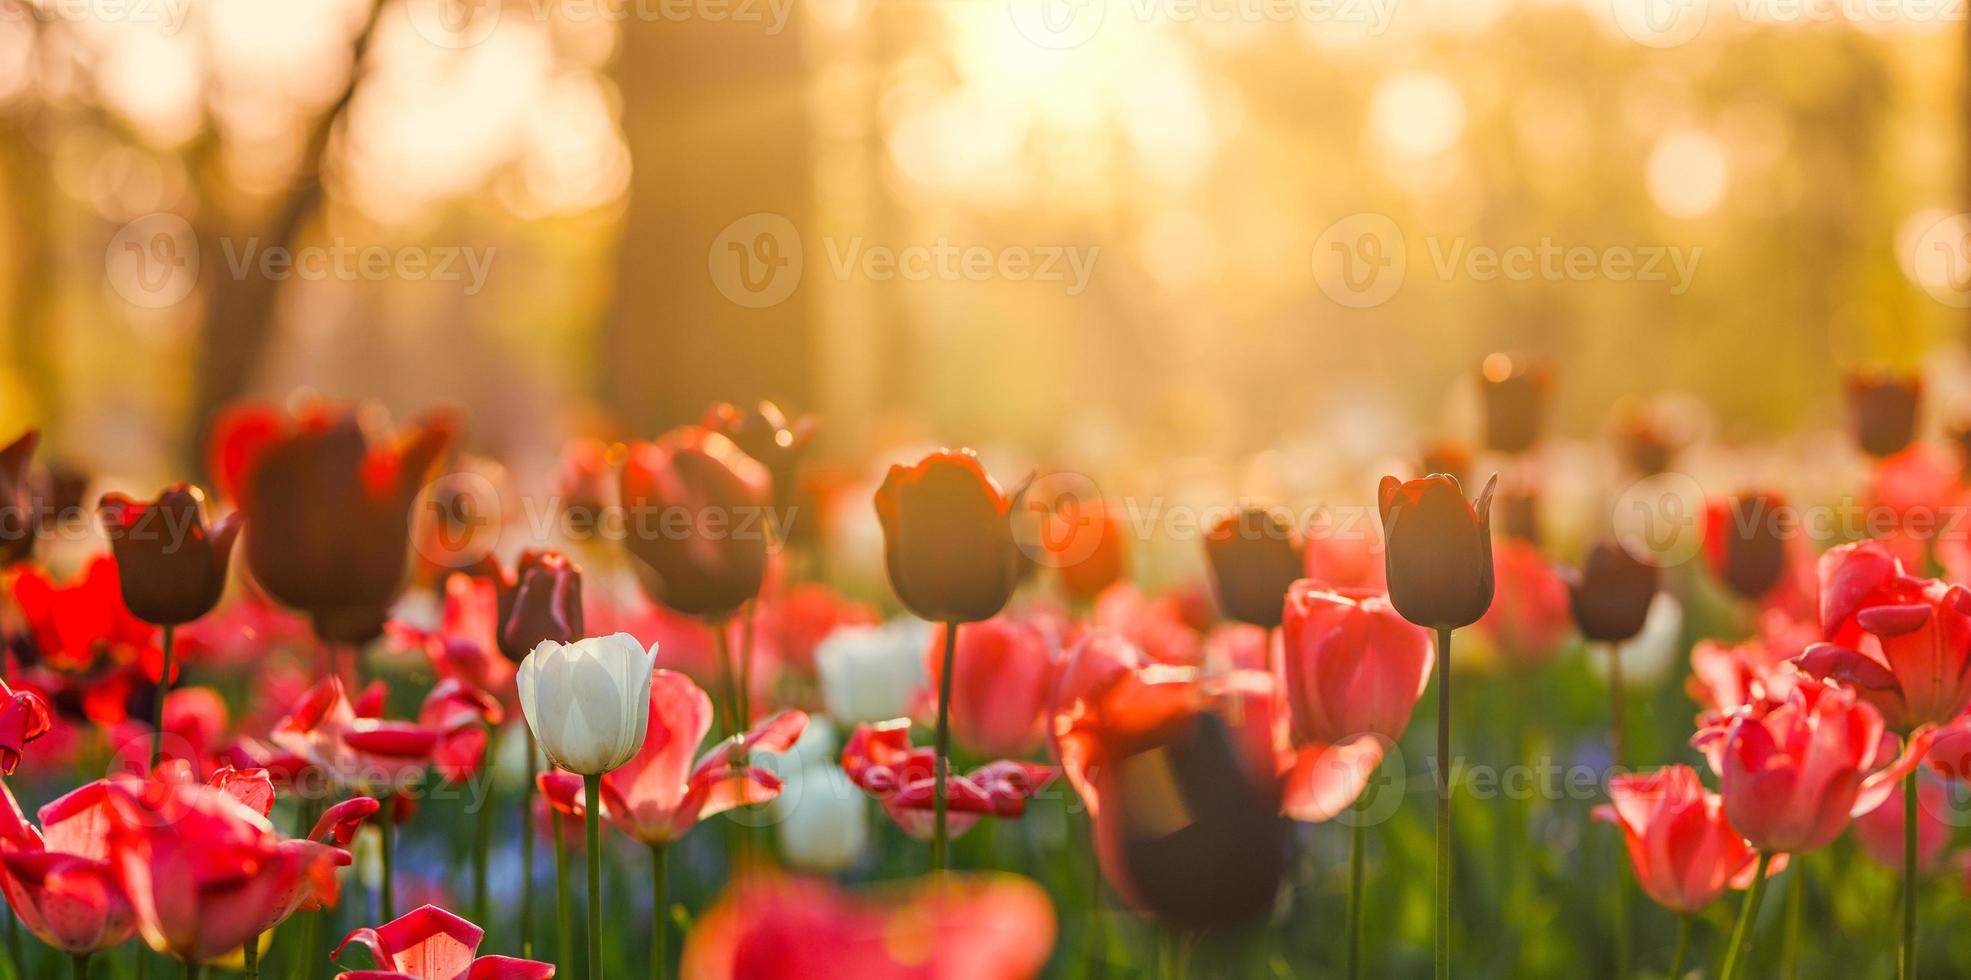 Beautiful bouquet panorama of red white and pink tulips in spring nature for card design and web banner. Serene closeup, idyllic romantic love floral nature landscape. Abstract blurred lush foliage photo